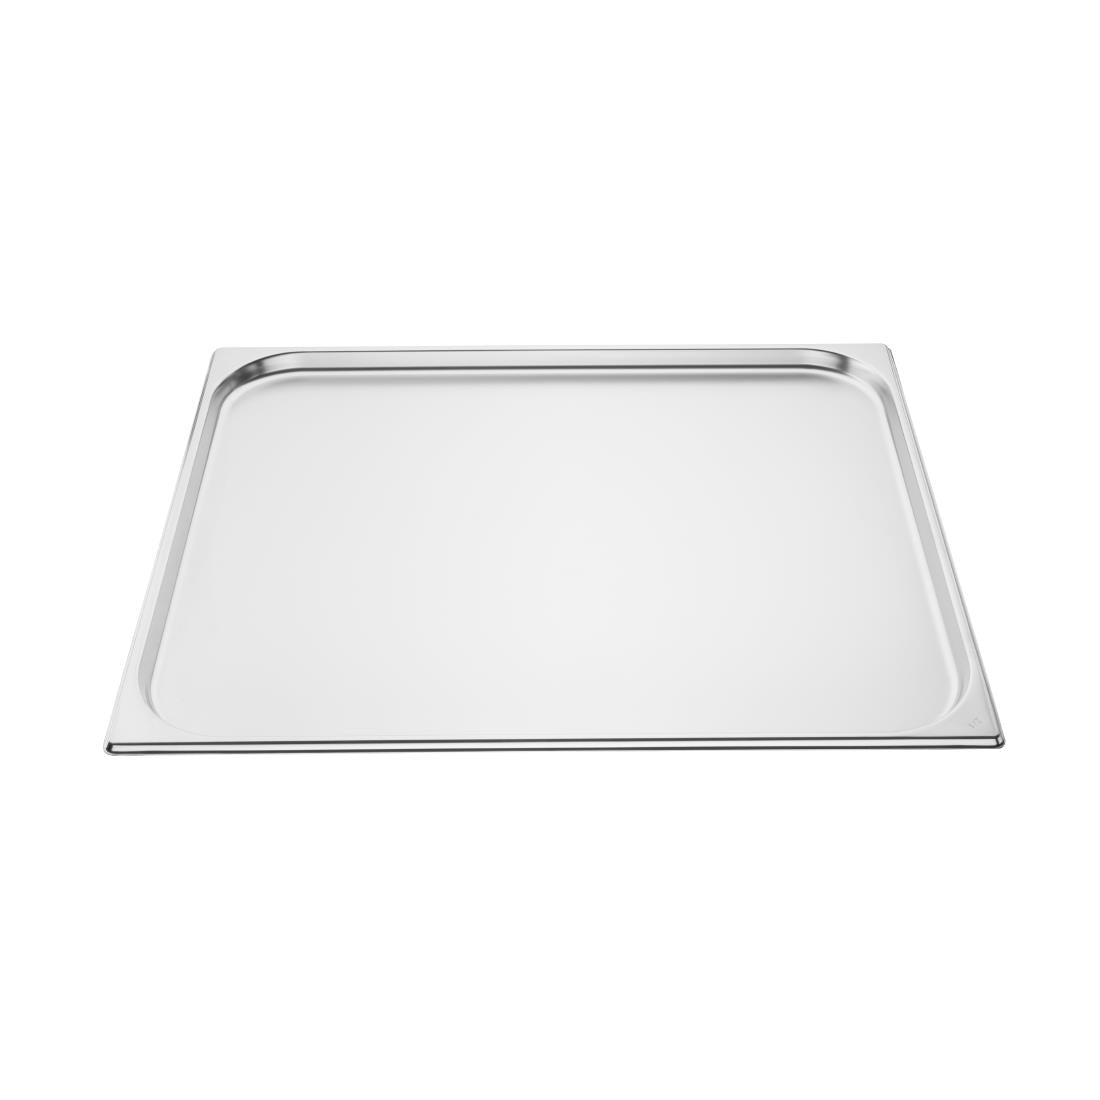 GM316 Vogue Stainless Steel 2/1 Gastronorm Pan 20mm